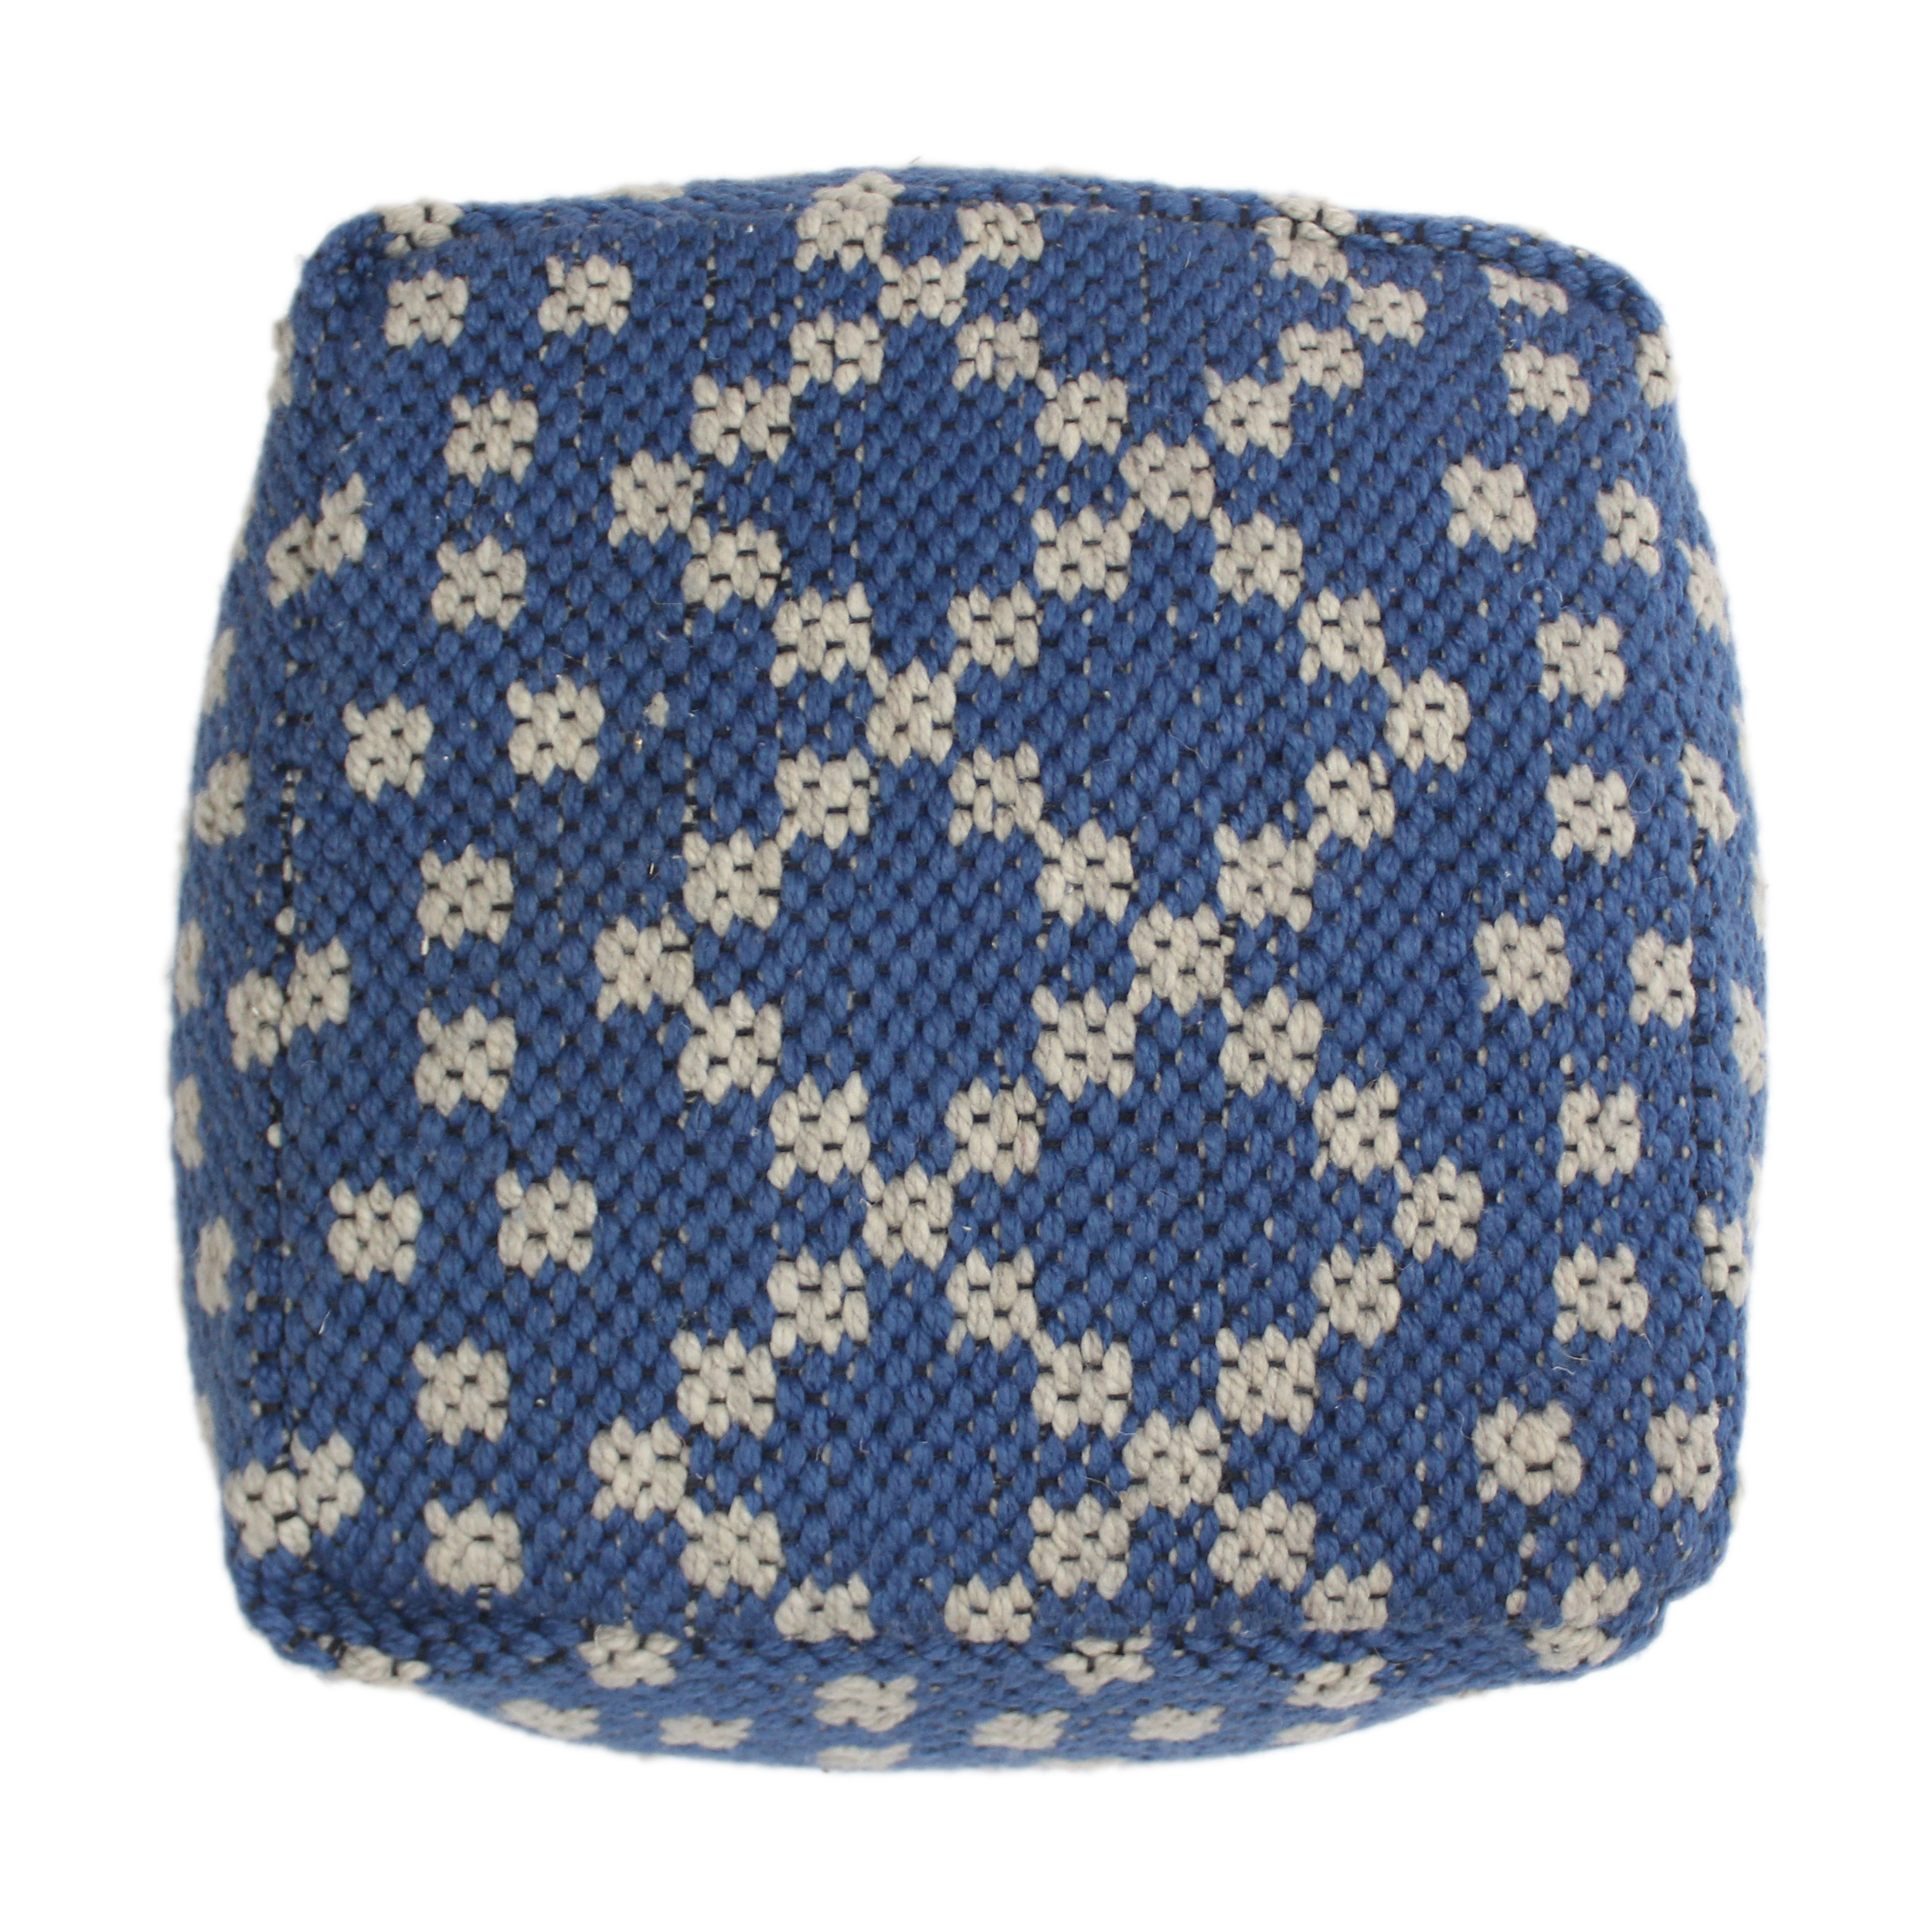 Ophelia Outdoor Handcrafted Boho Fabric Cube Pouf, Blue and White - image 6 of 6